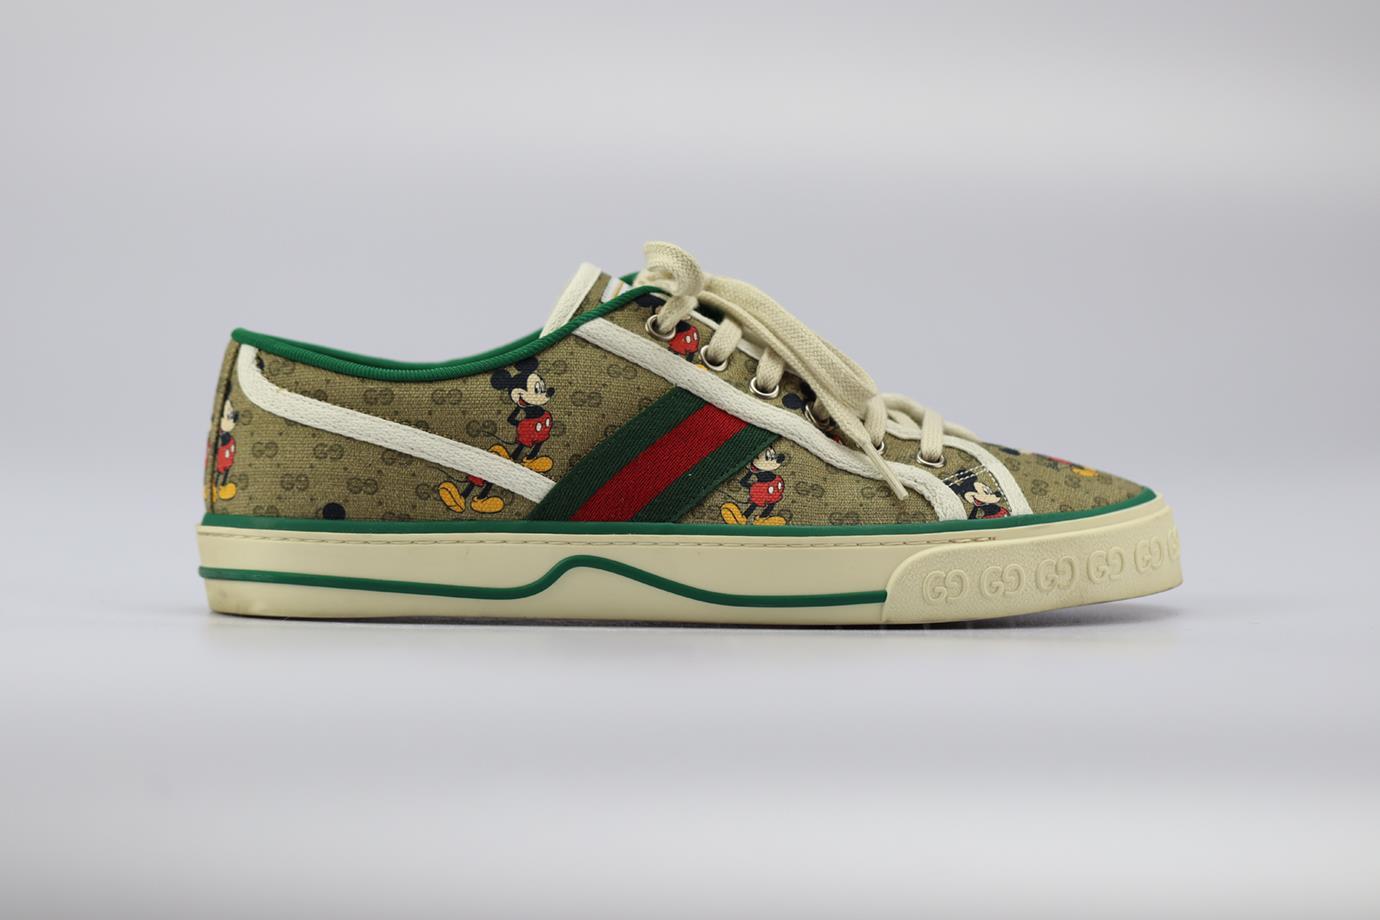 Gucci + Disney Tennis 1977 Canvas Sneakers. Multi. Lace up fastening - Front. Does not come with - dustbag or box. EU 40 (UK 7, US 10). Insole: 10.3 in. Heel height: 1.1 in. Condition: Used. Very good condition - Some wear to soles. Light wear to